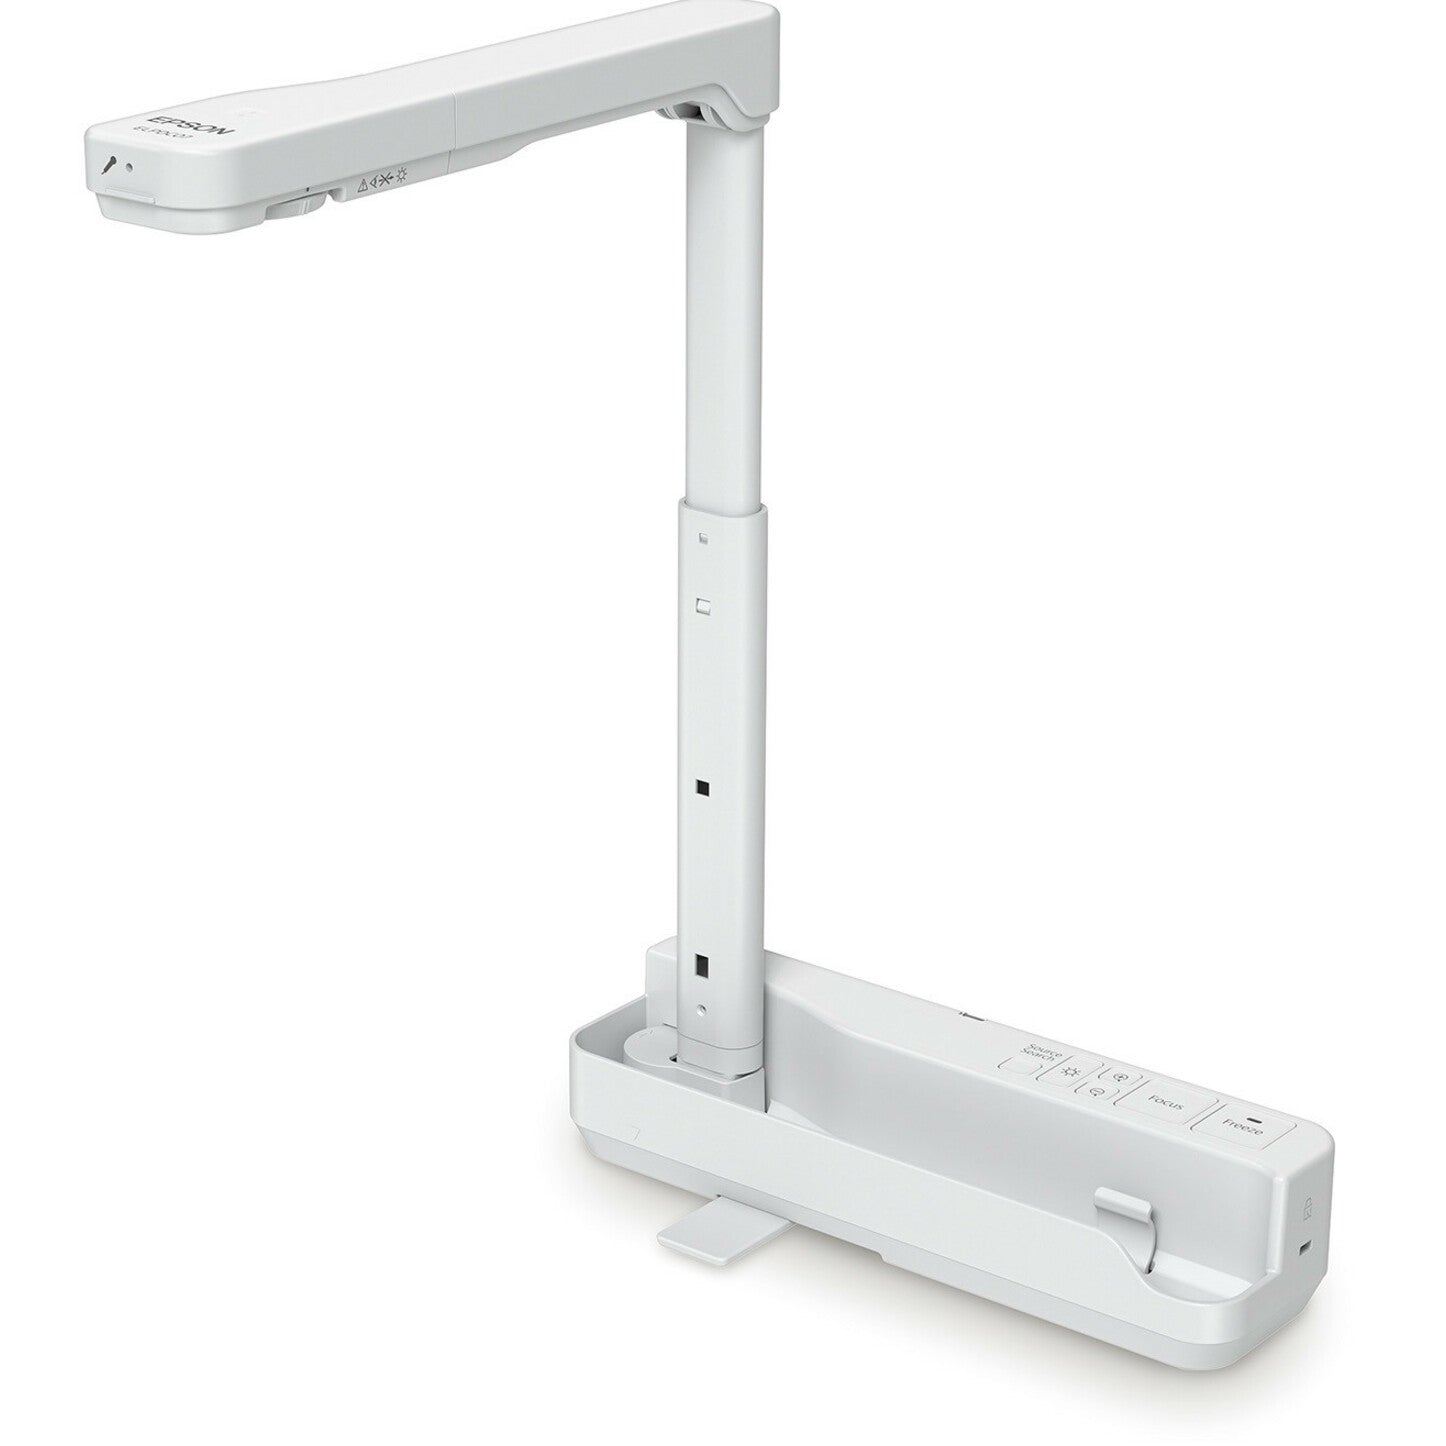 Epson V12H759020-N DC-07 Document Camera - Refurbished, Built-in Microphone, Auto Focus, 8x Digital Zoom, Color Display